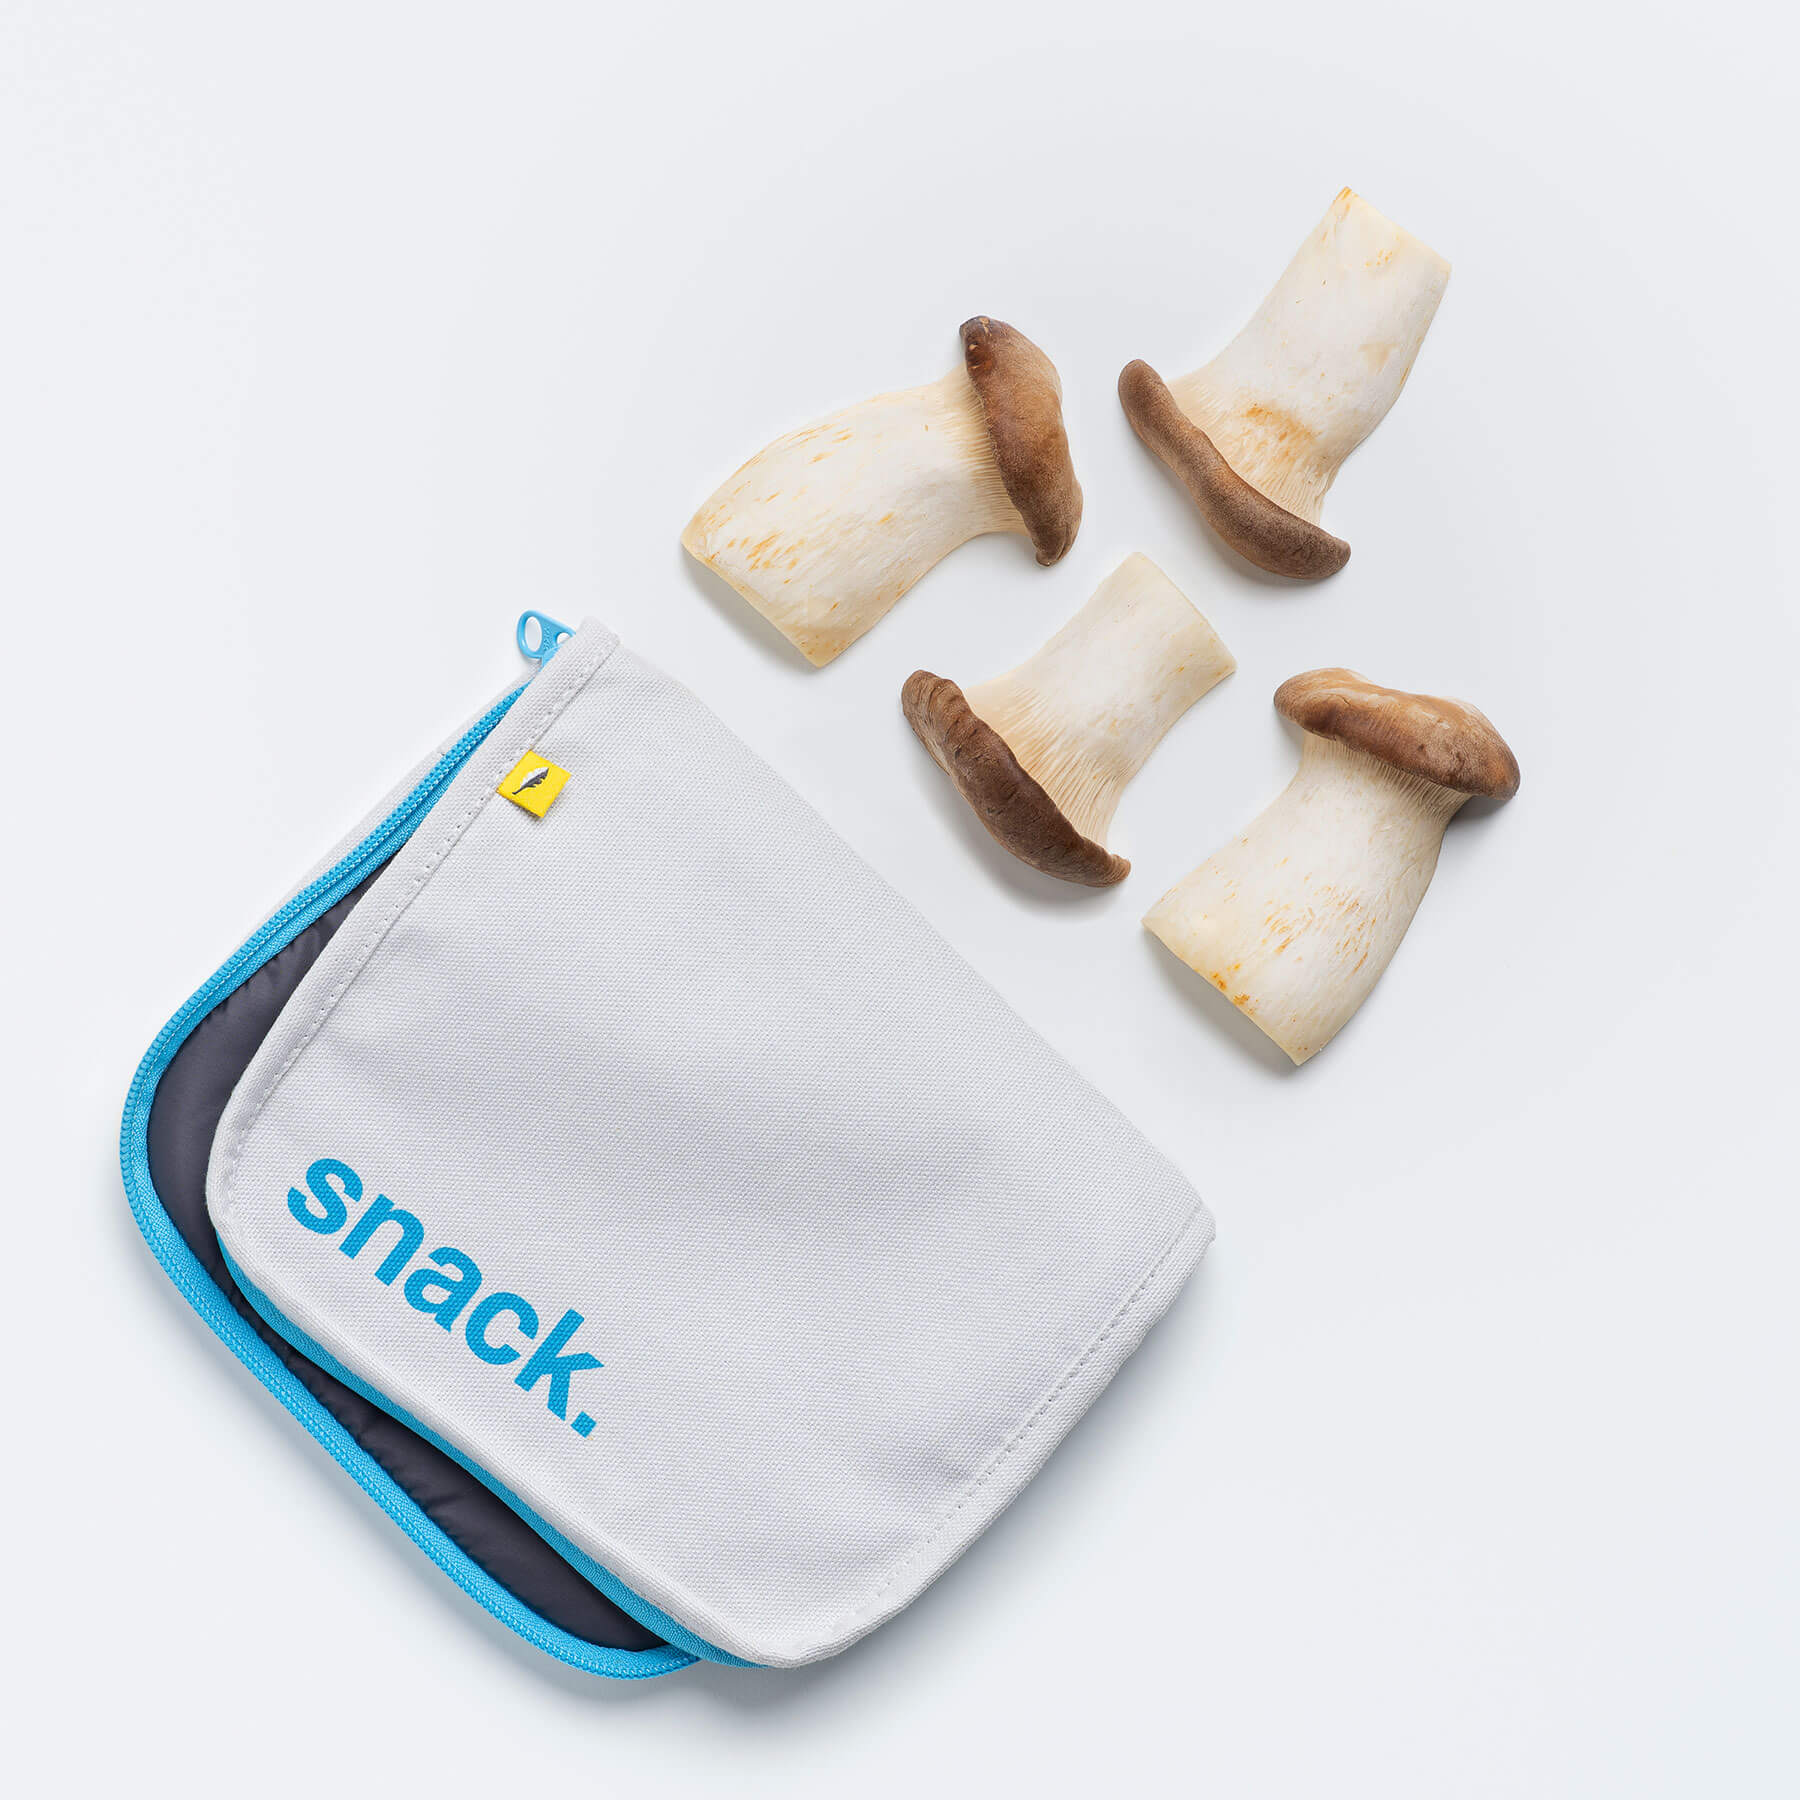 'Snack' Blue with Blue Zip Snack Pack